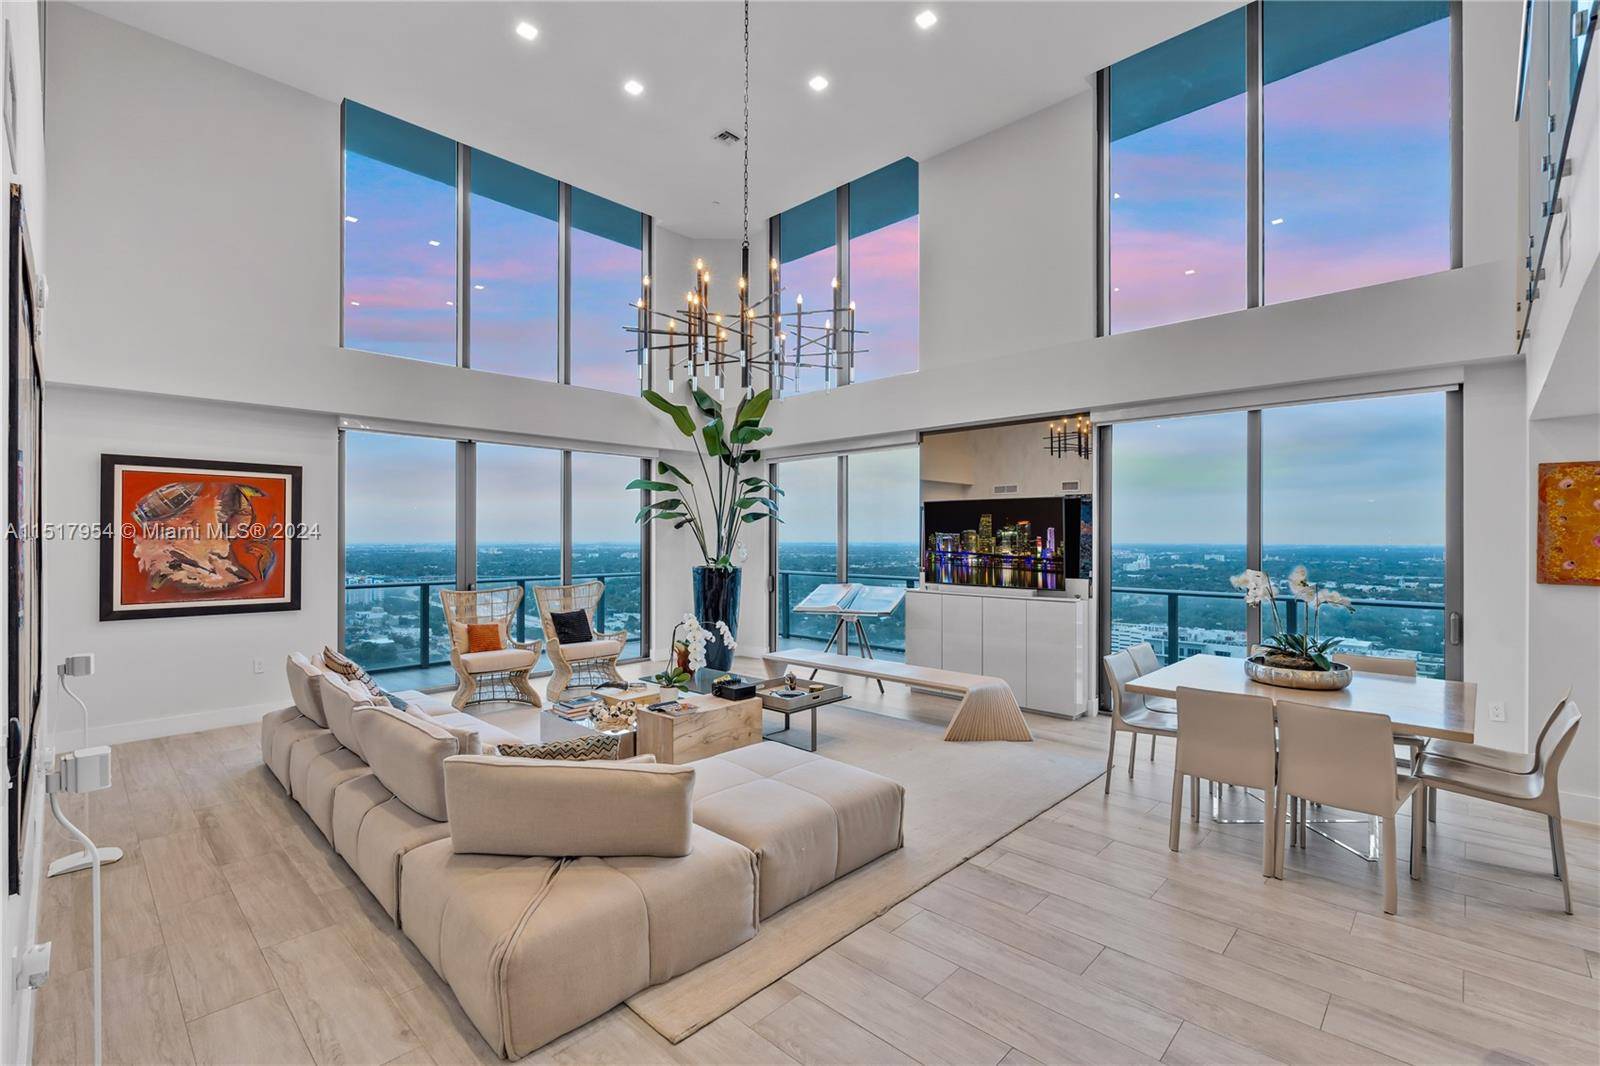 Discover Hyde PH3217, a spectacular northwest corner triplex penthouse in Midtown Miami's Hyde Residences.